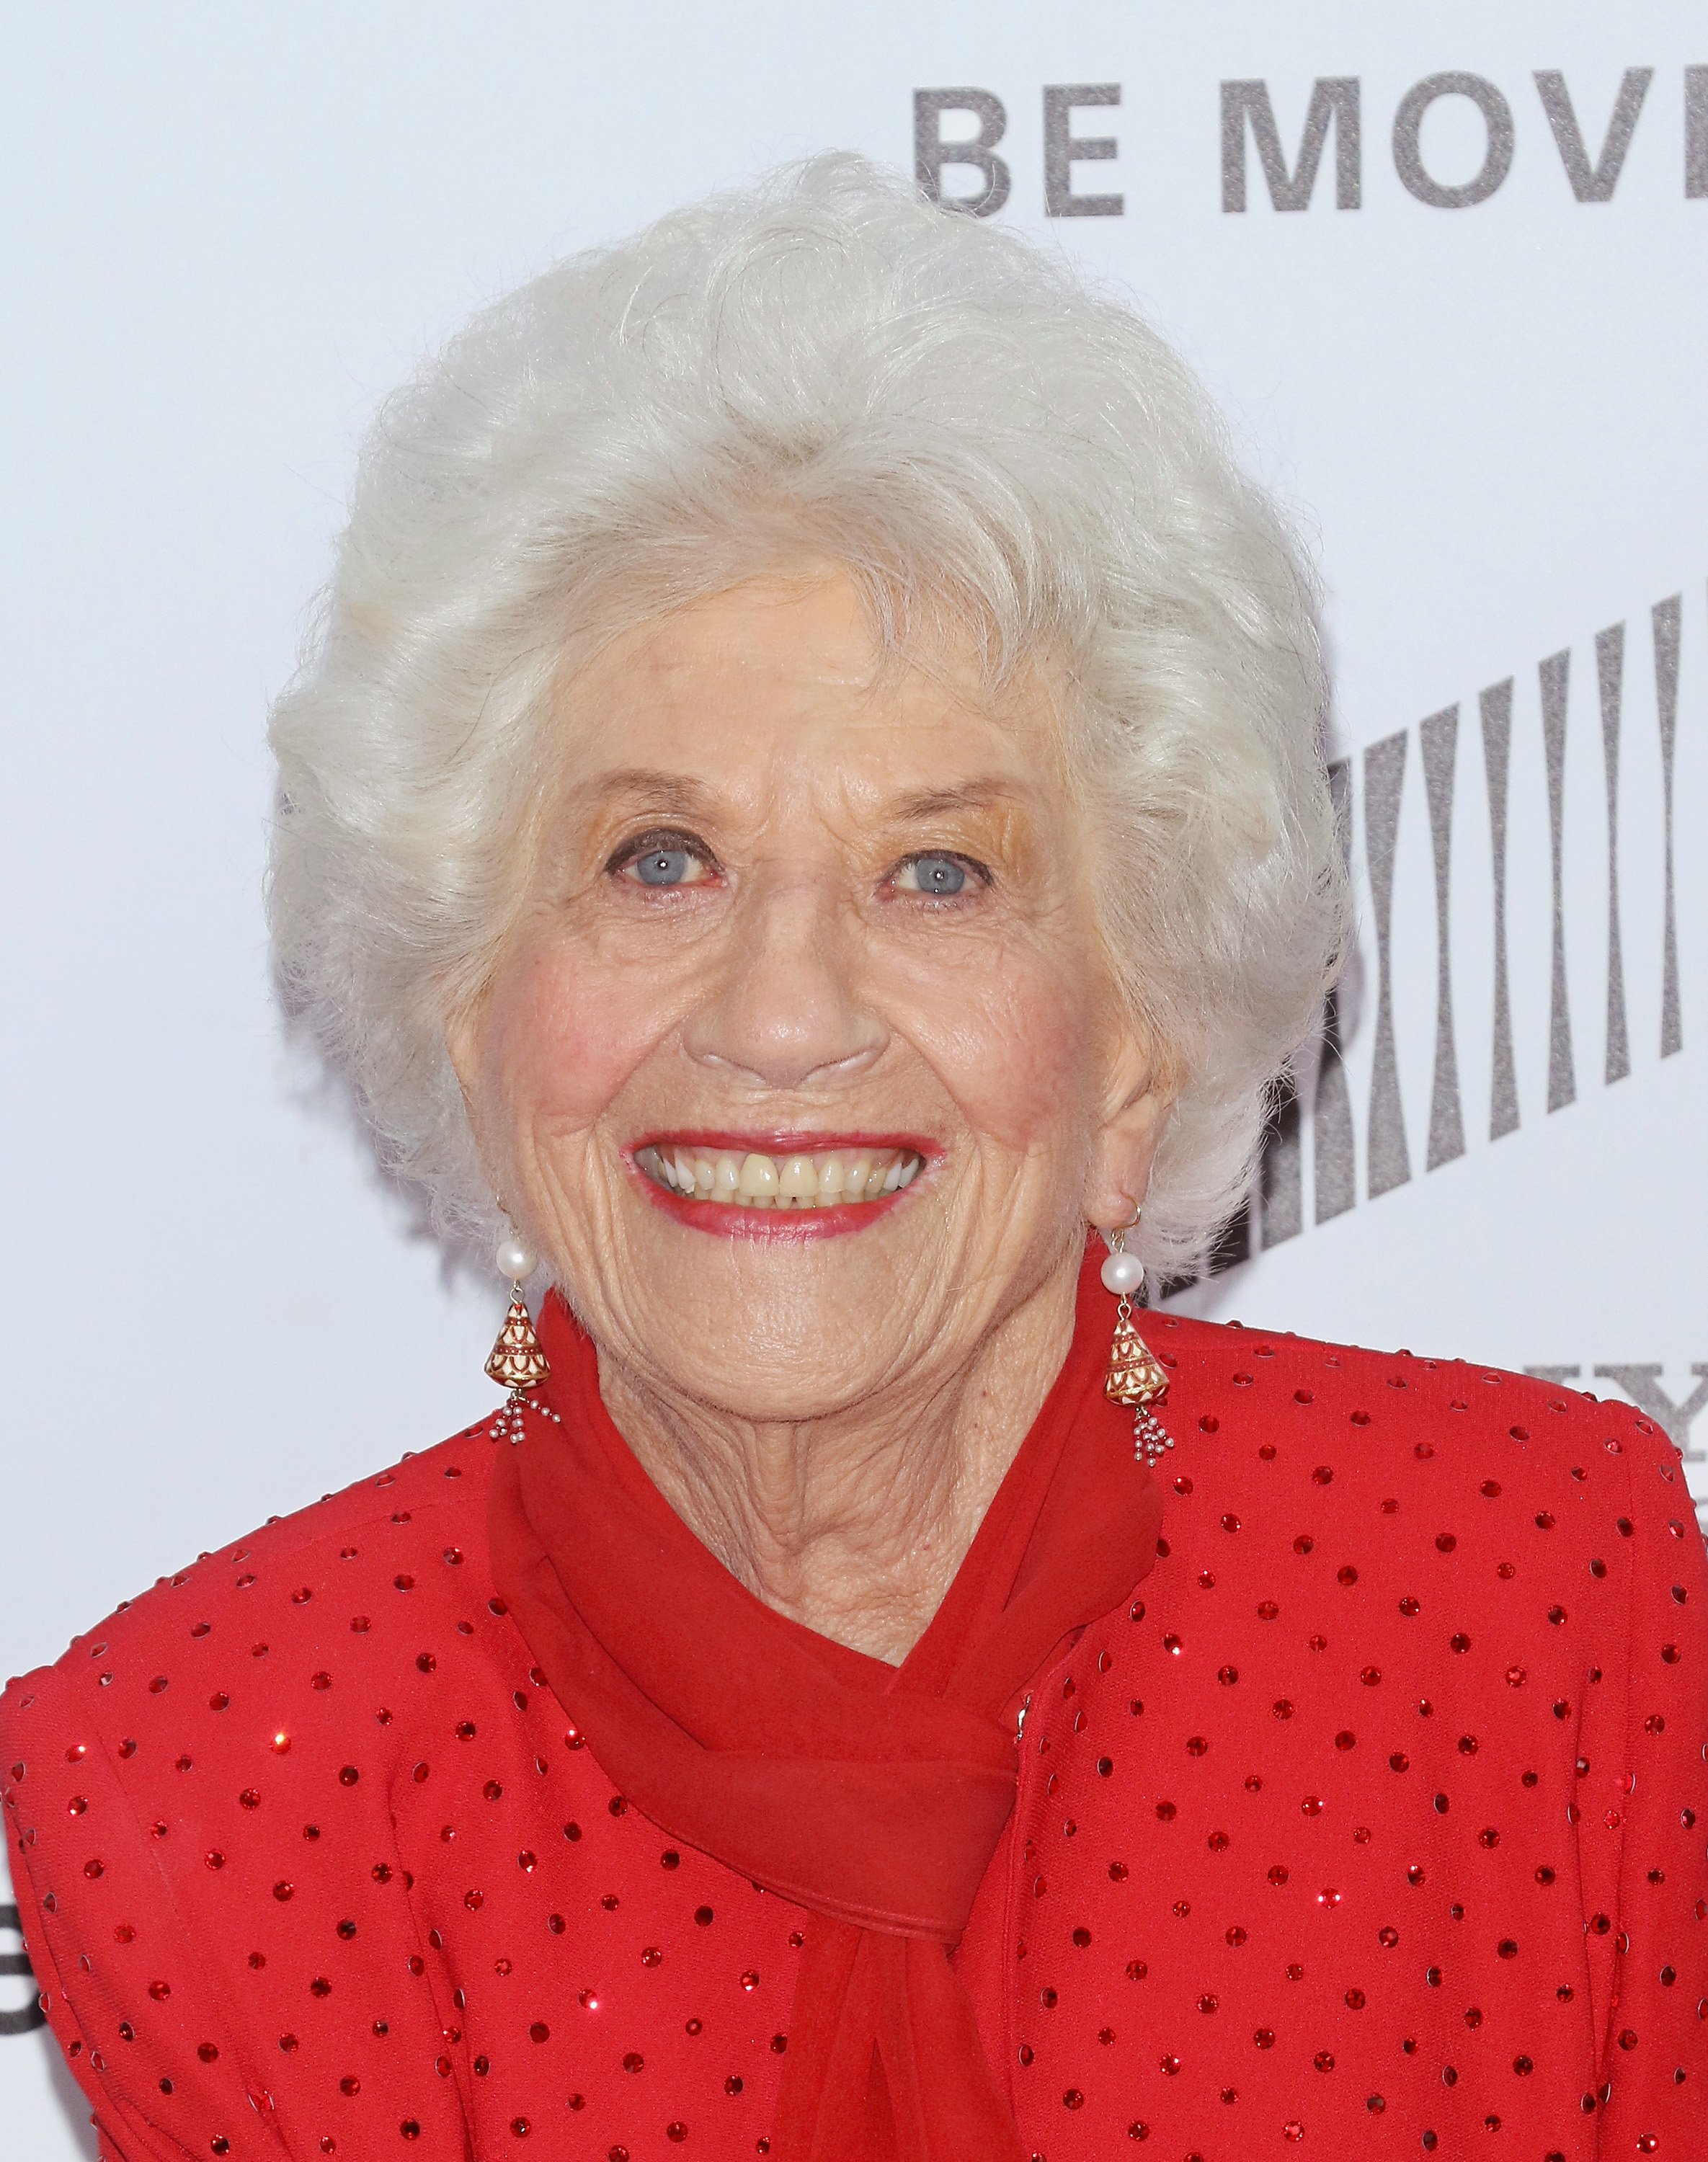 Actress Charlotte Rae attends the "Ricki And The Flash" New York premiere at AMC Lincoln Square Theater on August 3, 2015. | Source: Getty Images